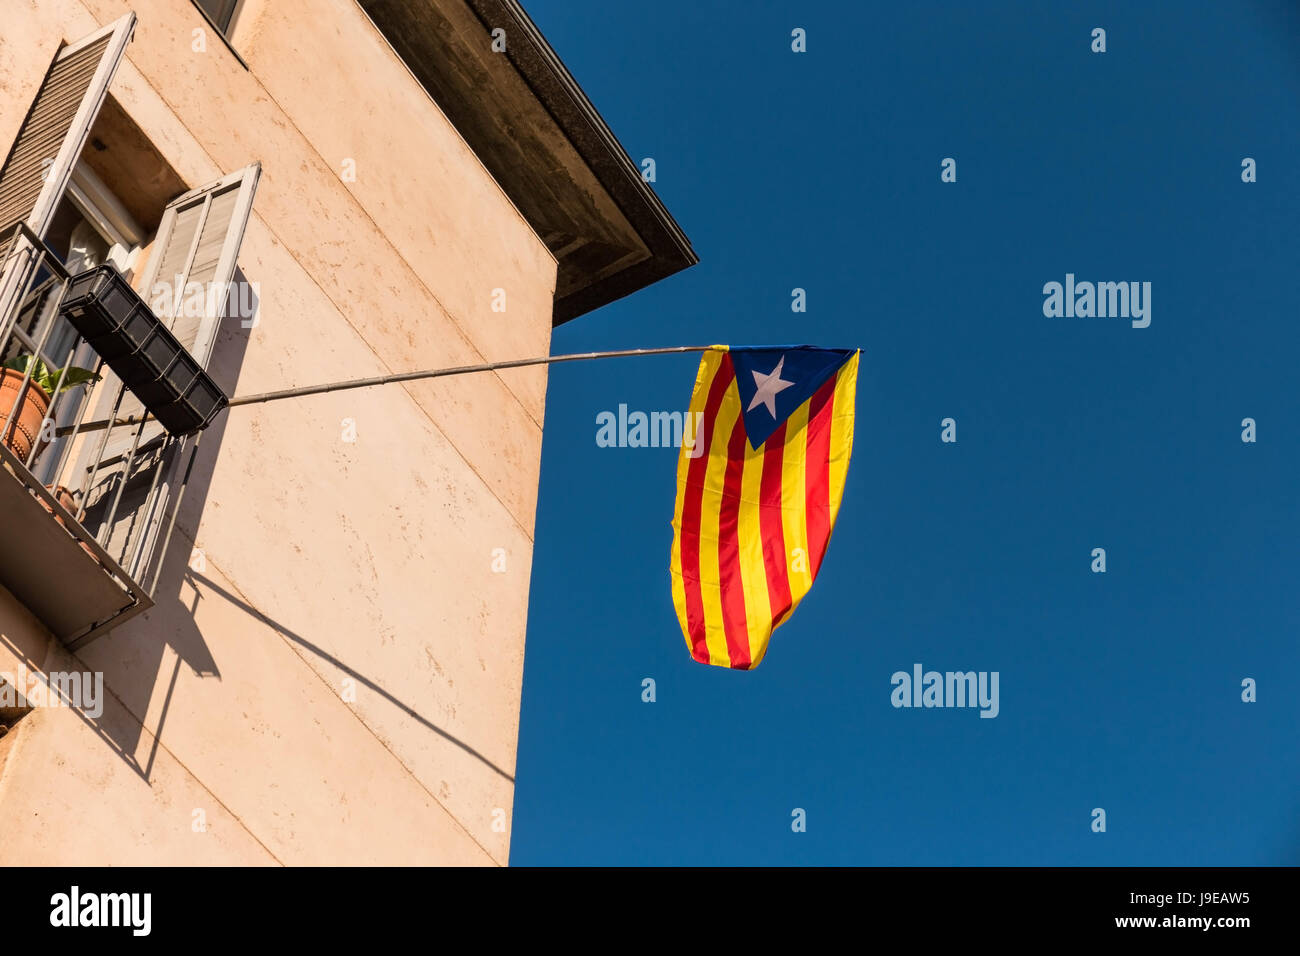 Flag of independence movement of Catalonia, called Estelada (unofficial), in a street of the downtown of Girona, Costa Brava, Catalonia, Spain. Stock Photo